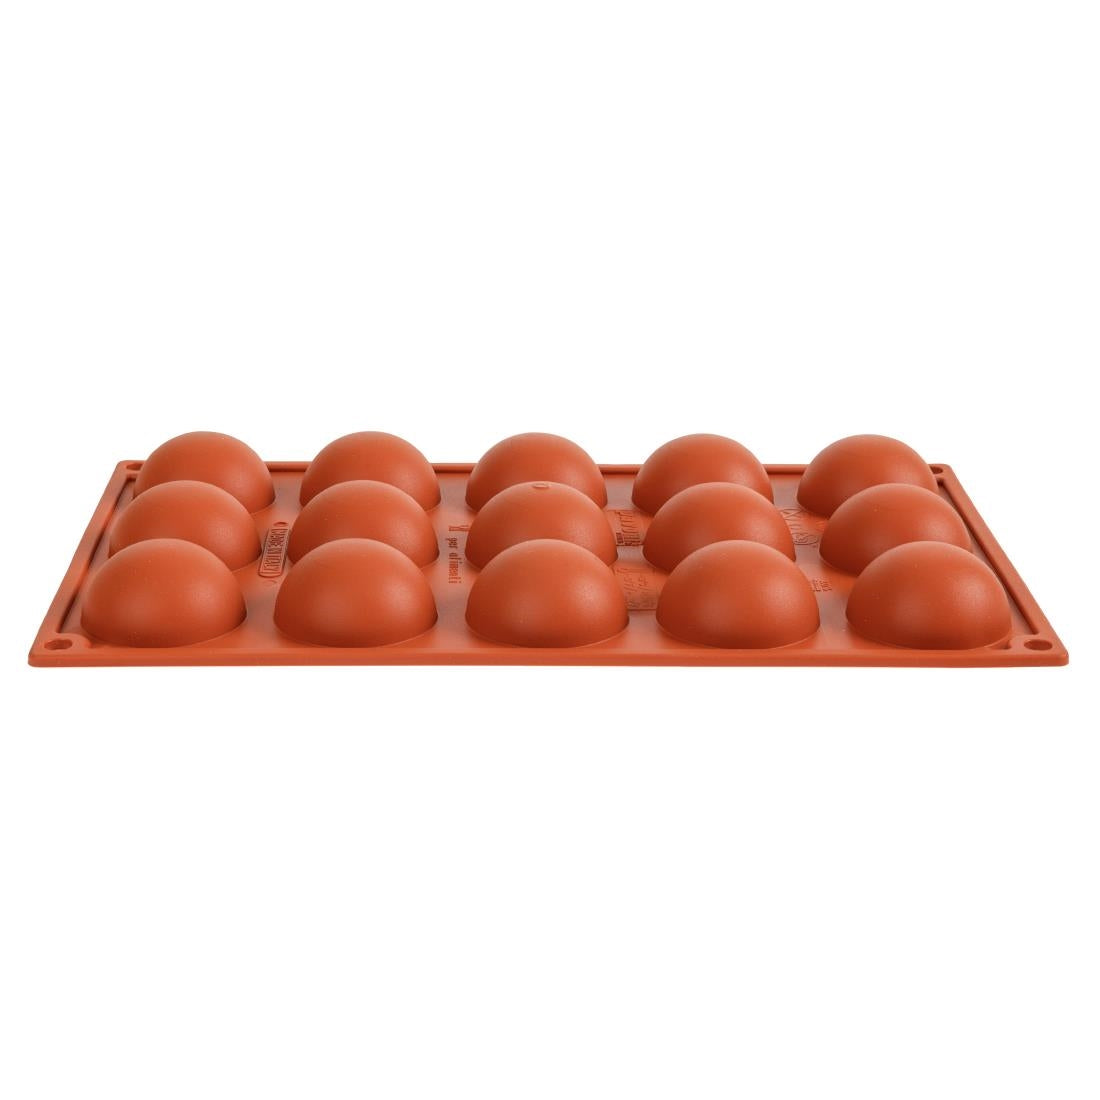 N936 Pavoni Formaflex Silicone Half Sphere Mould 15 Cup